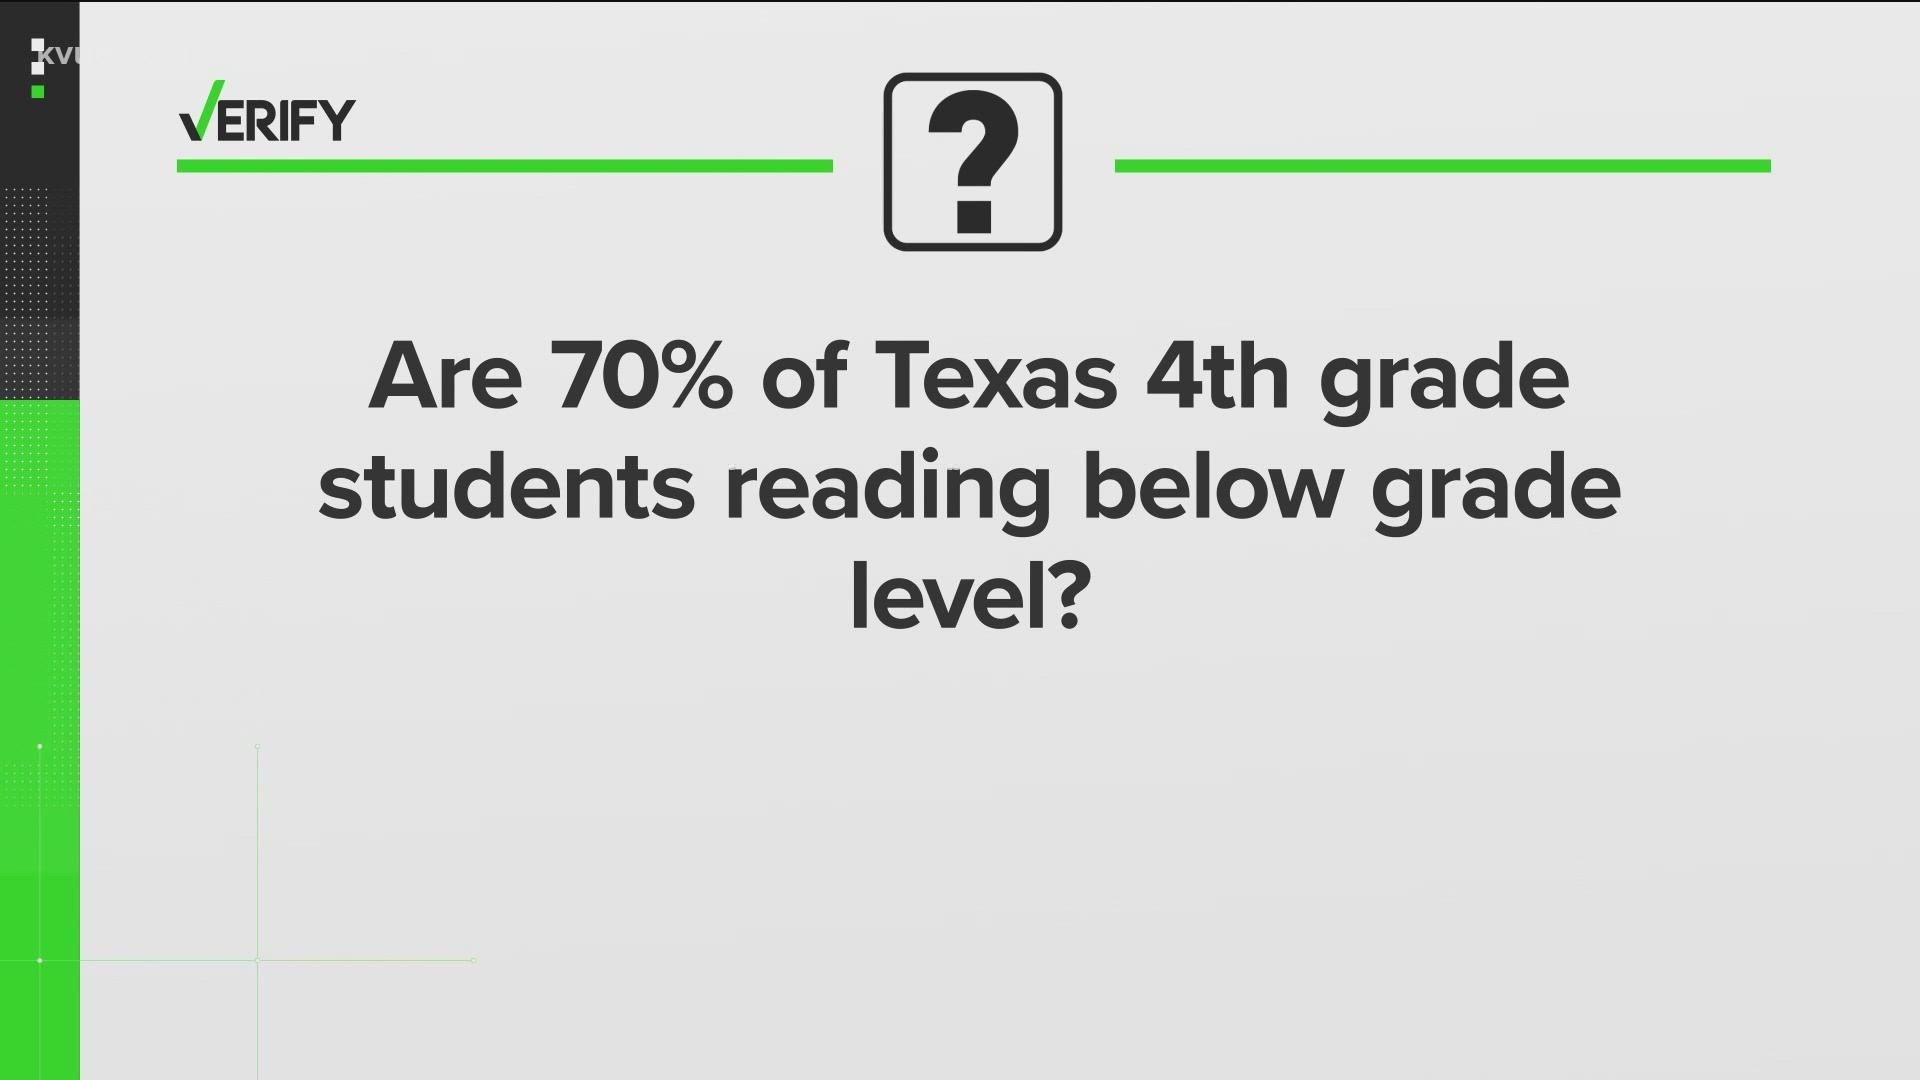 We looked into a claim by gubernatorial candidate Beto O'Rourke that 7 out of 10 Texas 4th graders "cannot read at grade level."